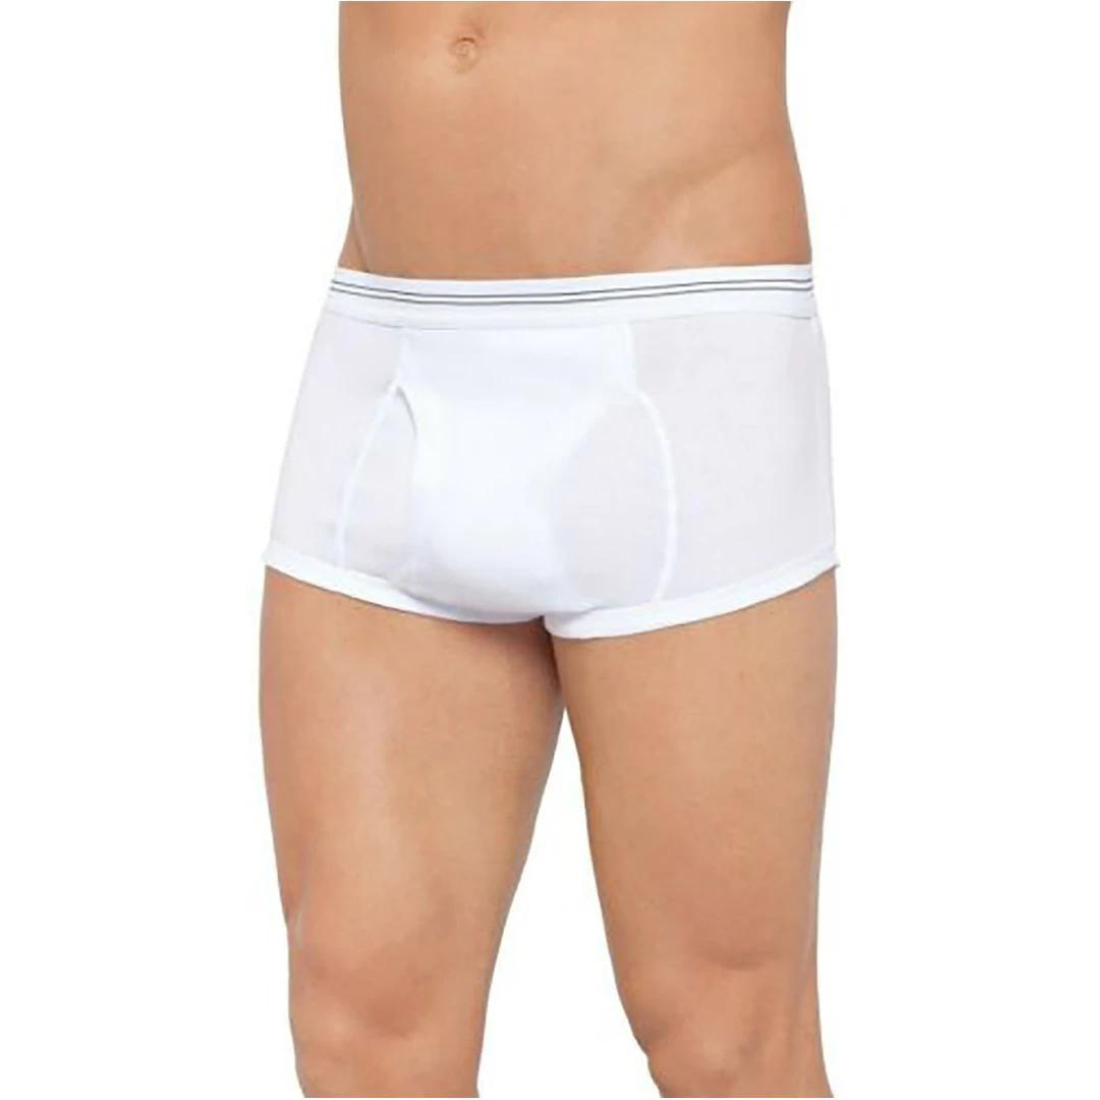 Bells Double Seat Brief White Mens Underwear by Holeproof | The Bloke Shop